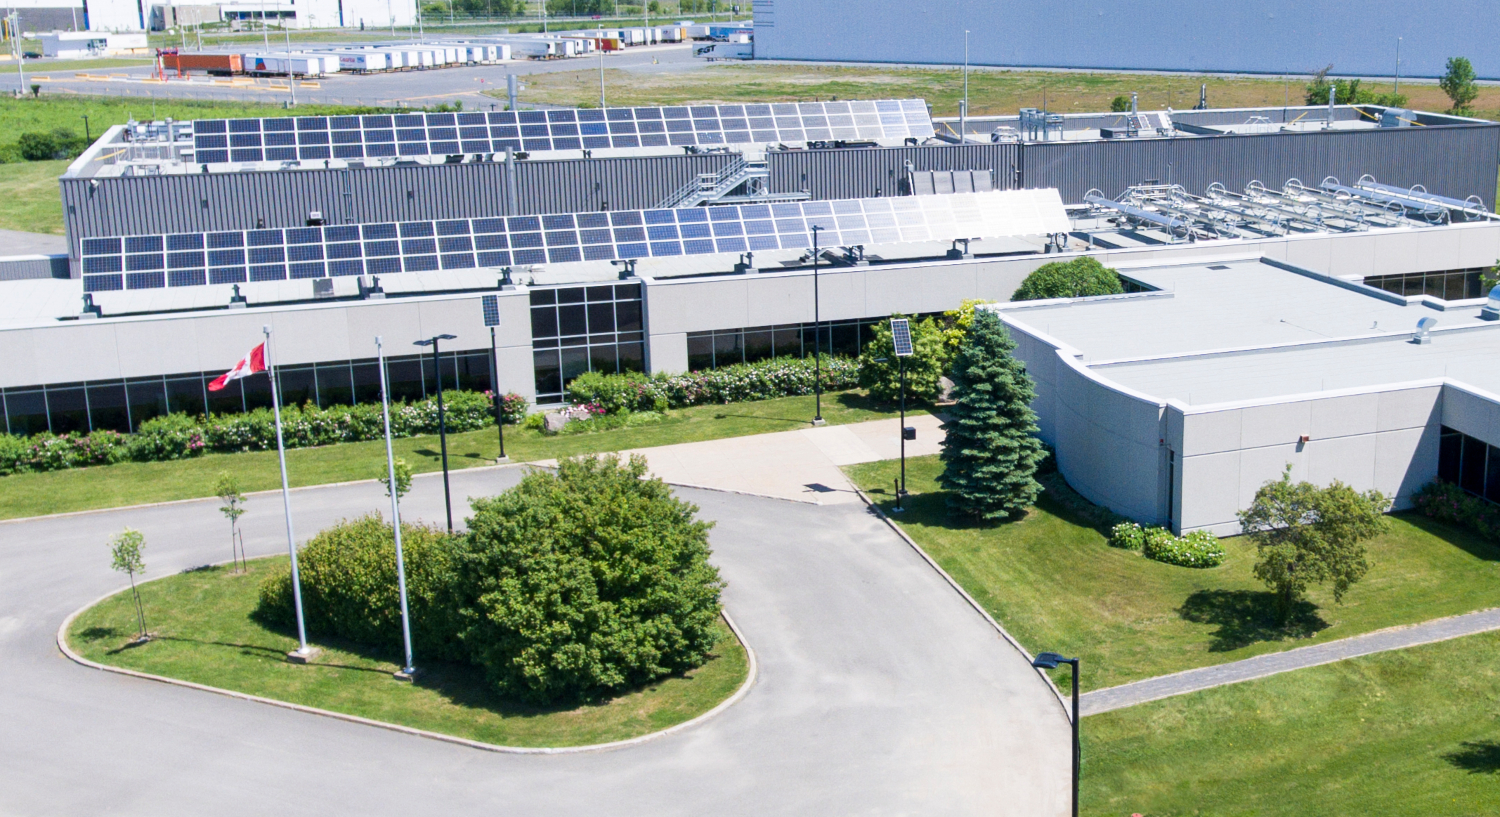 Aerial view of the CanmetENERGY research centre building in Varennes, with its many solar panels on the roof.